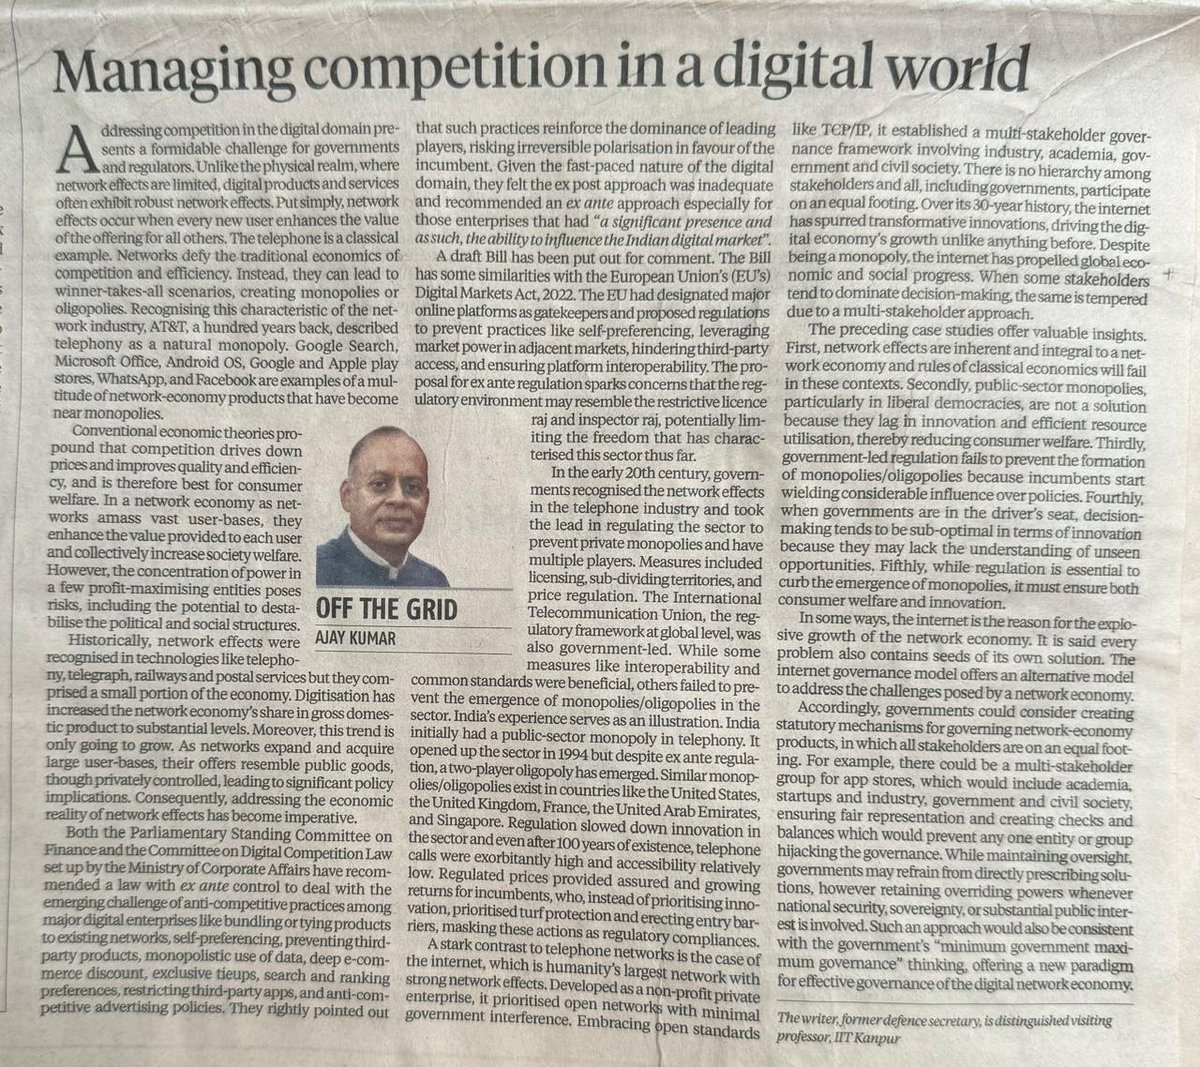 With monopolies pervading the digital domain, addressing competition presents a formidable challenge. In my article “Managing Competition in a Digital World” in Business Standard today I explore an alternative model business-standard.com/opinion/column…